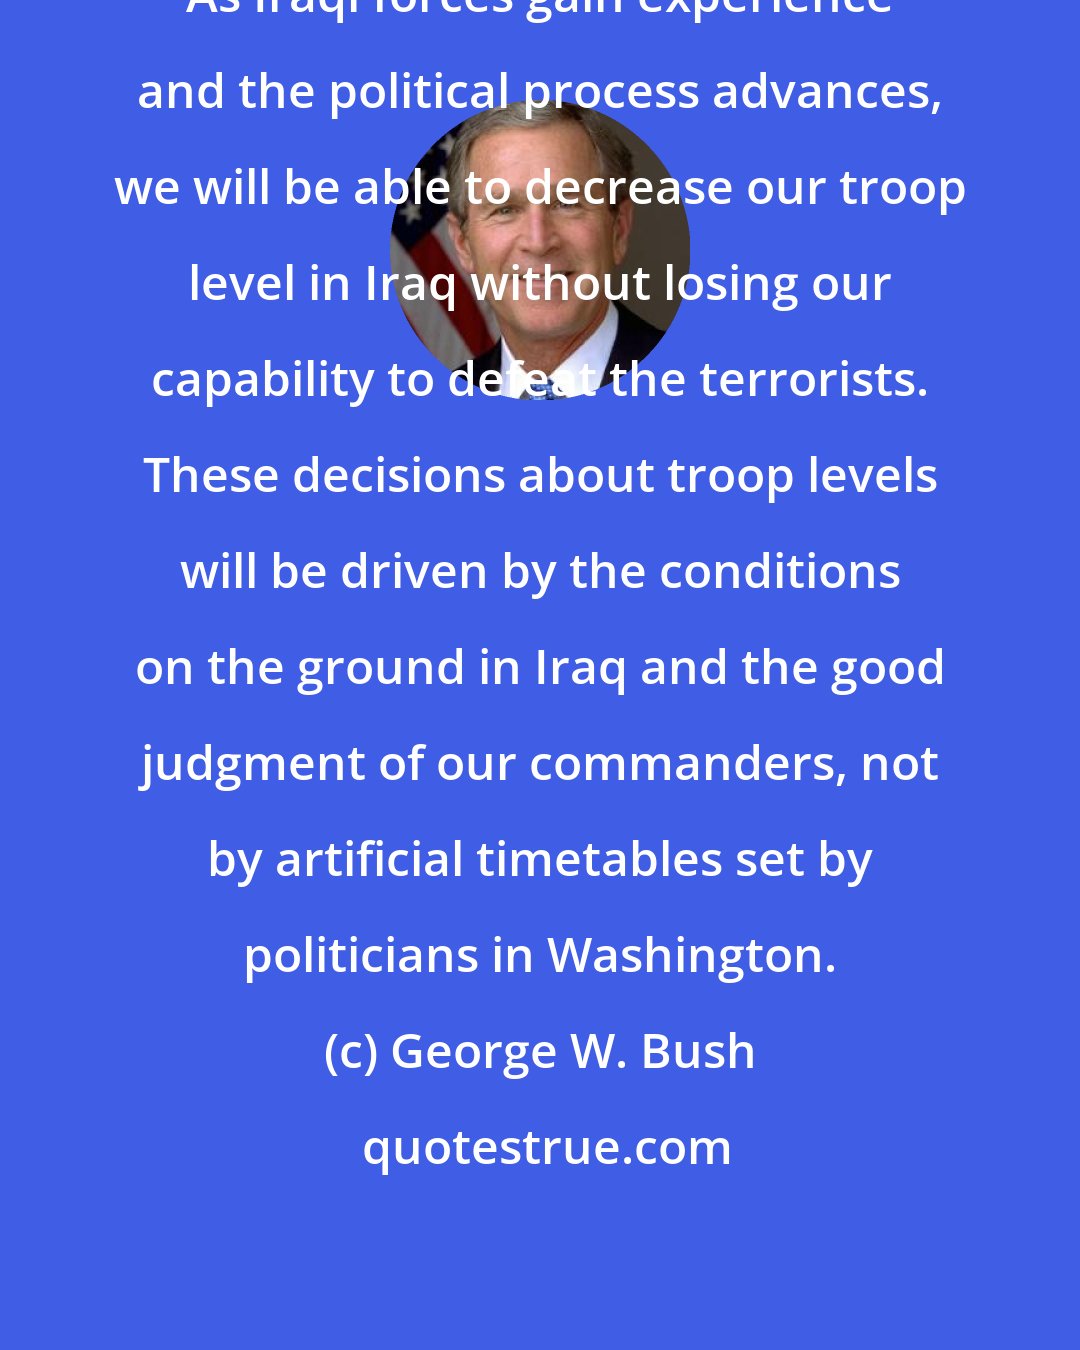 George W. Bush: As Iraqi forces gain experience and the political process advances, we will be able to decrease our troop level in Iraq without losing our capability to defeat the terrorists. These decisions about troop levels will be driven by the conditions on the ground in Iraq and the good judgment of our commanders, not by artificial timetables set by politicians in Washington.